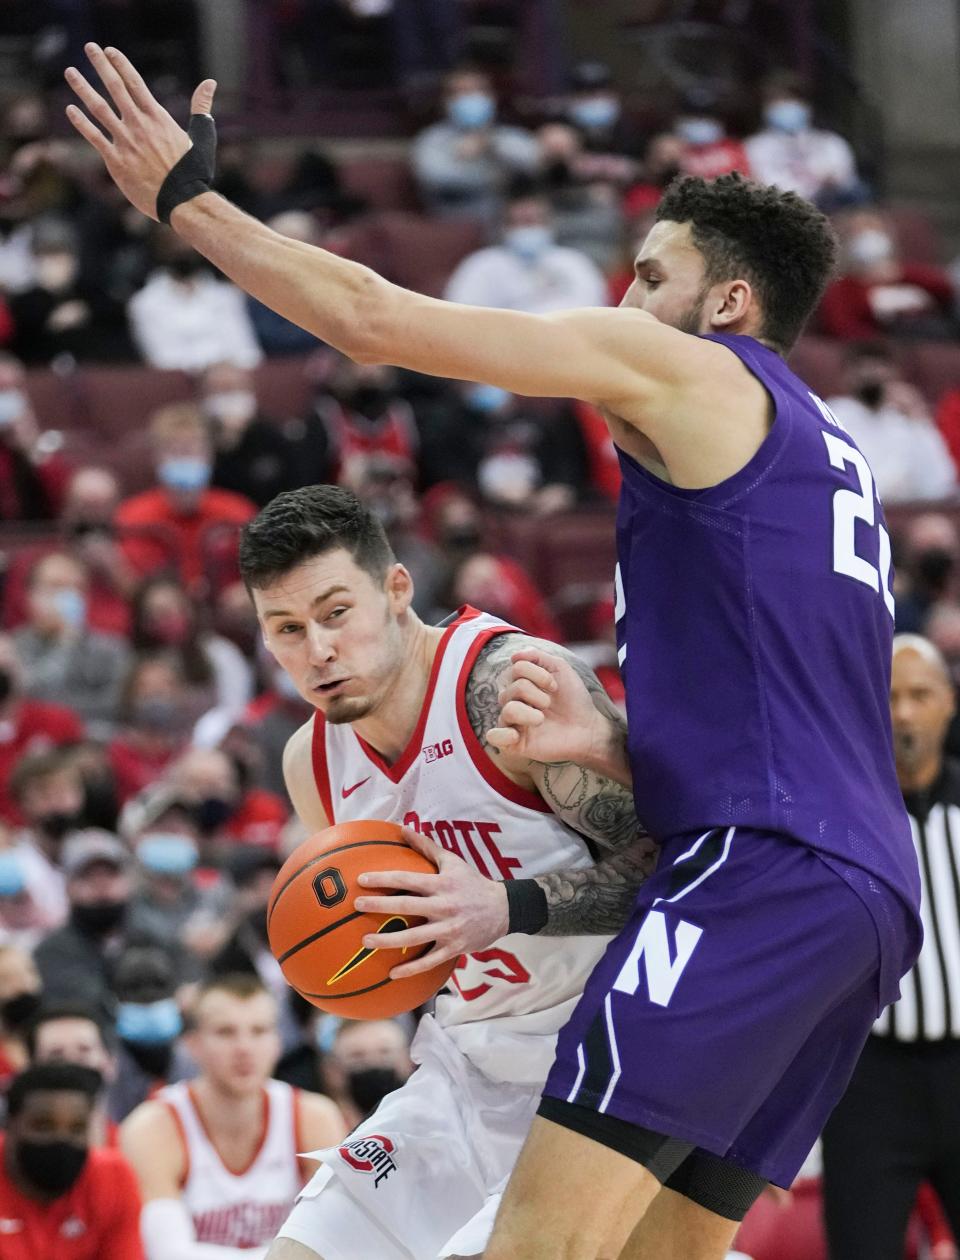 Sun., Jan. 9, 2022; Columbus, Ohio, USA; Ohio State Buckeyes forward Kyle Young (25) drives against Northwestern Wildcats forward Pete Nance (22) during the second half of a NCAA Division I men’s basketball game between the Ohio State Buckeyes and the Northwestern Wildcats at Value City Arena.